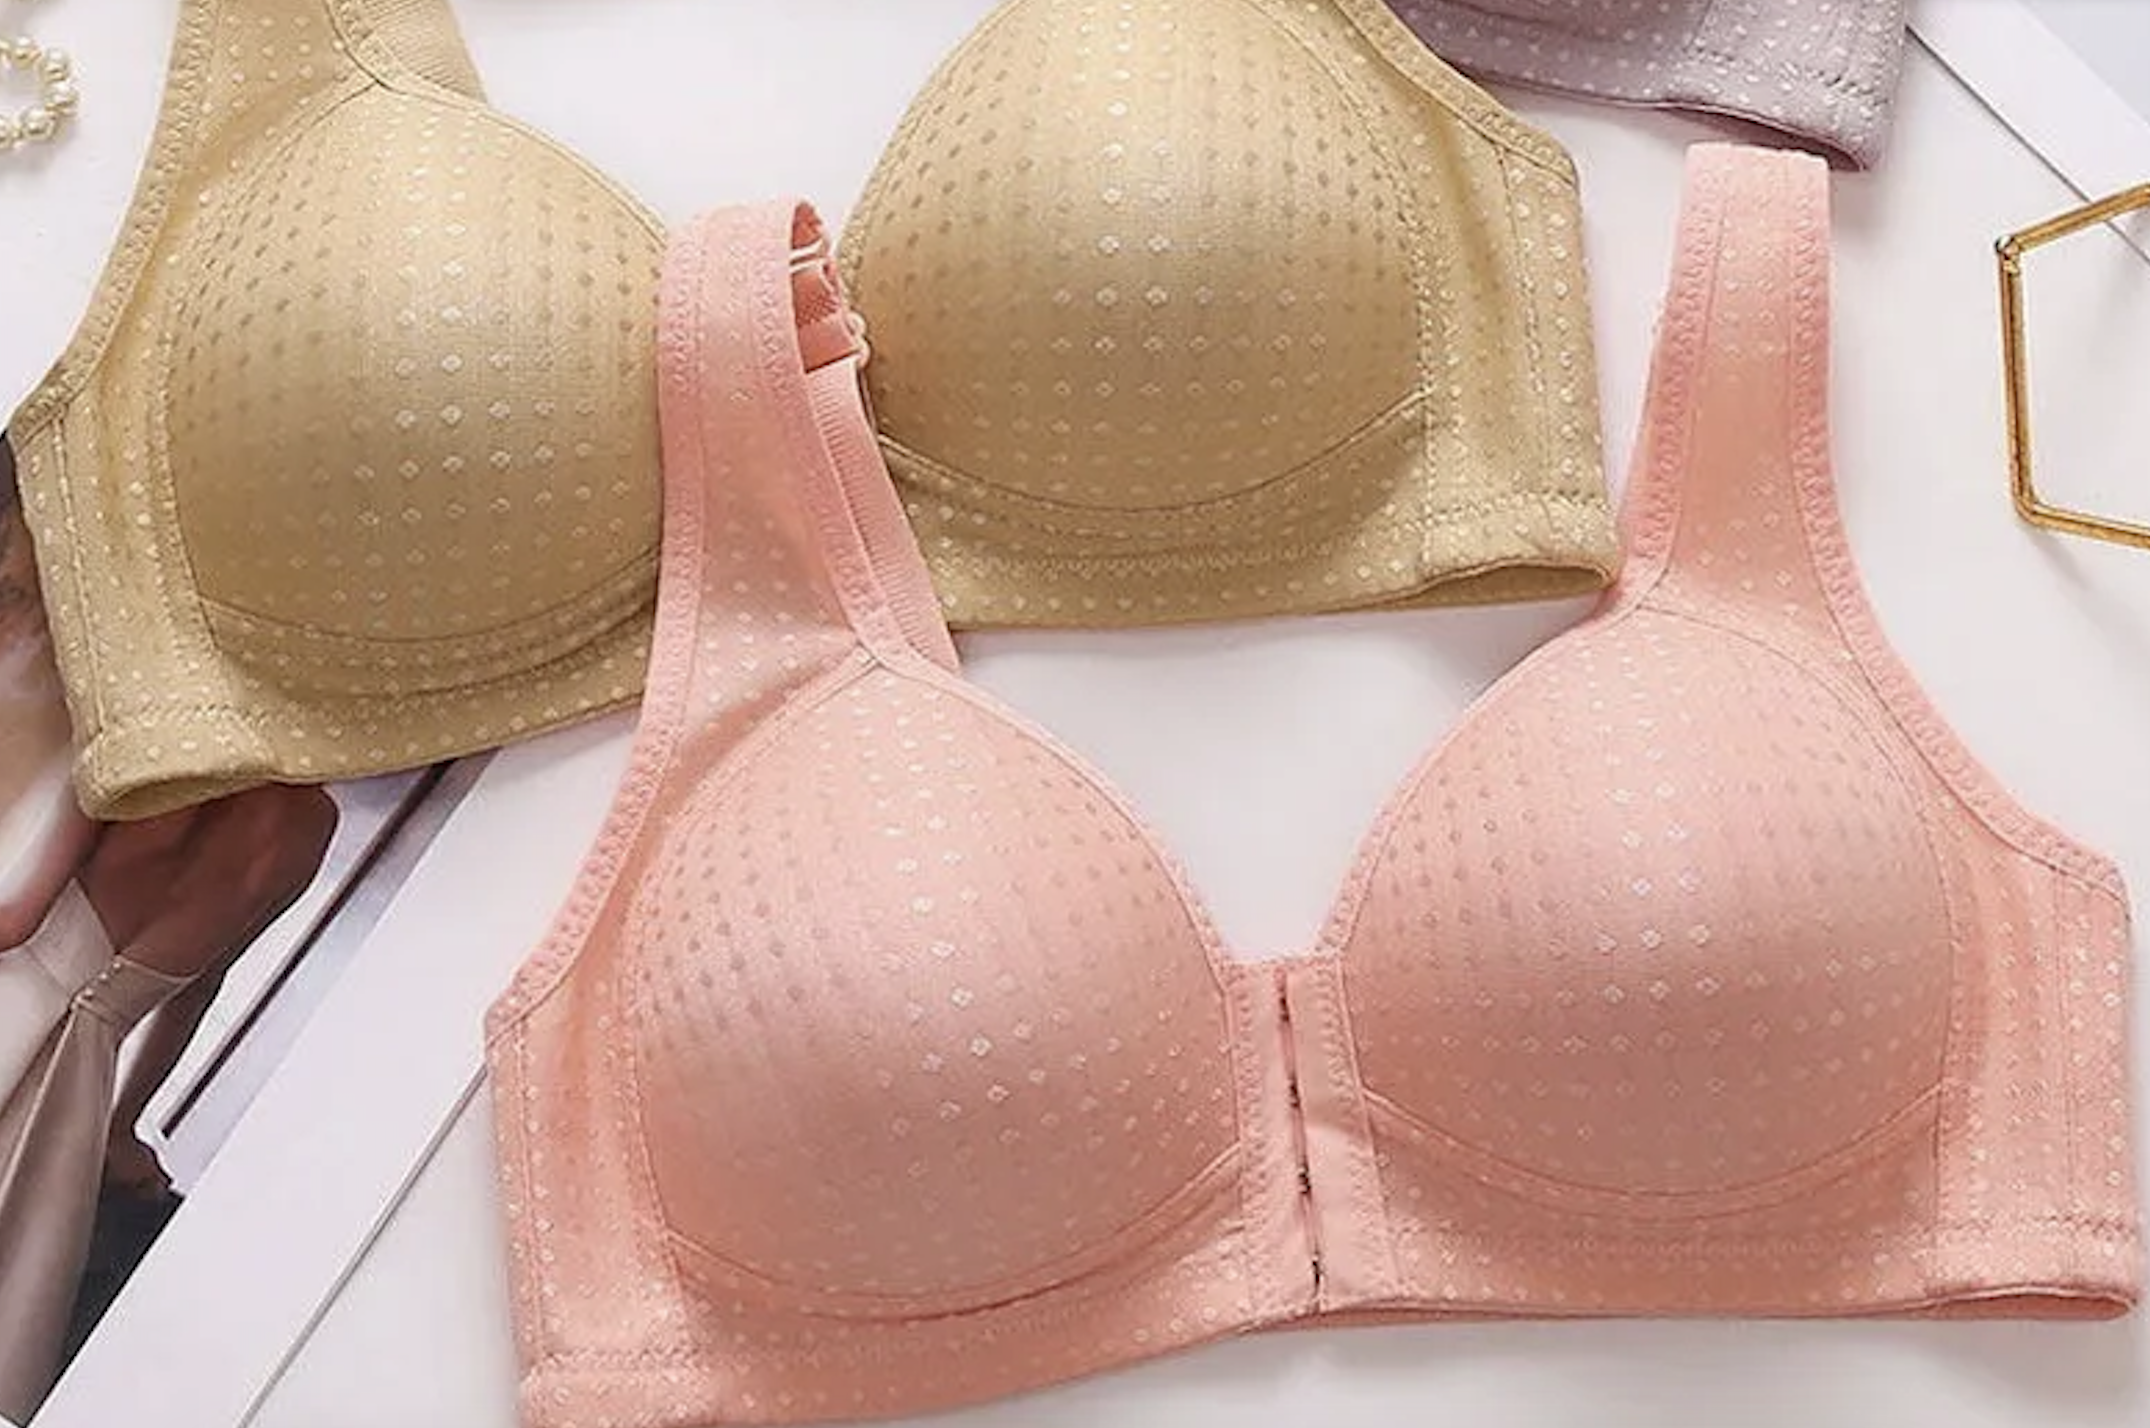 Saggy Breast? This Bra Will Help You With That Problem